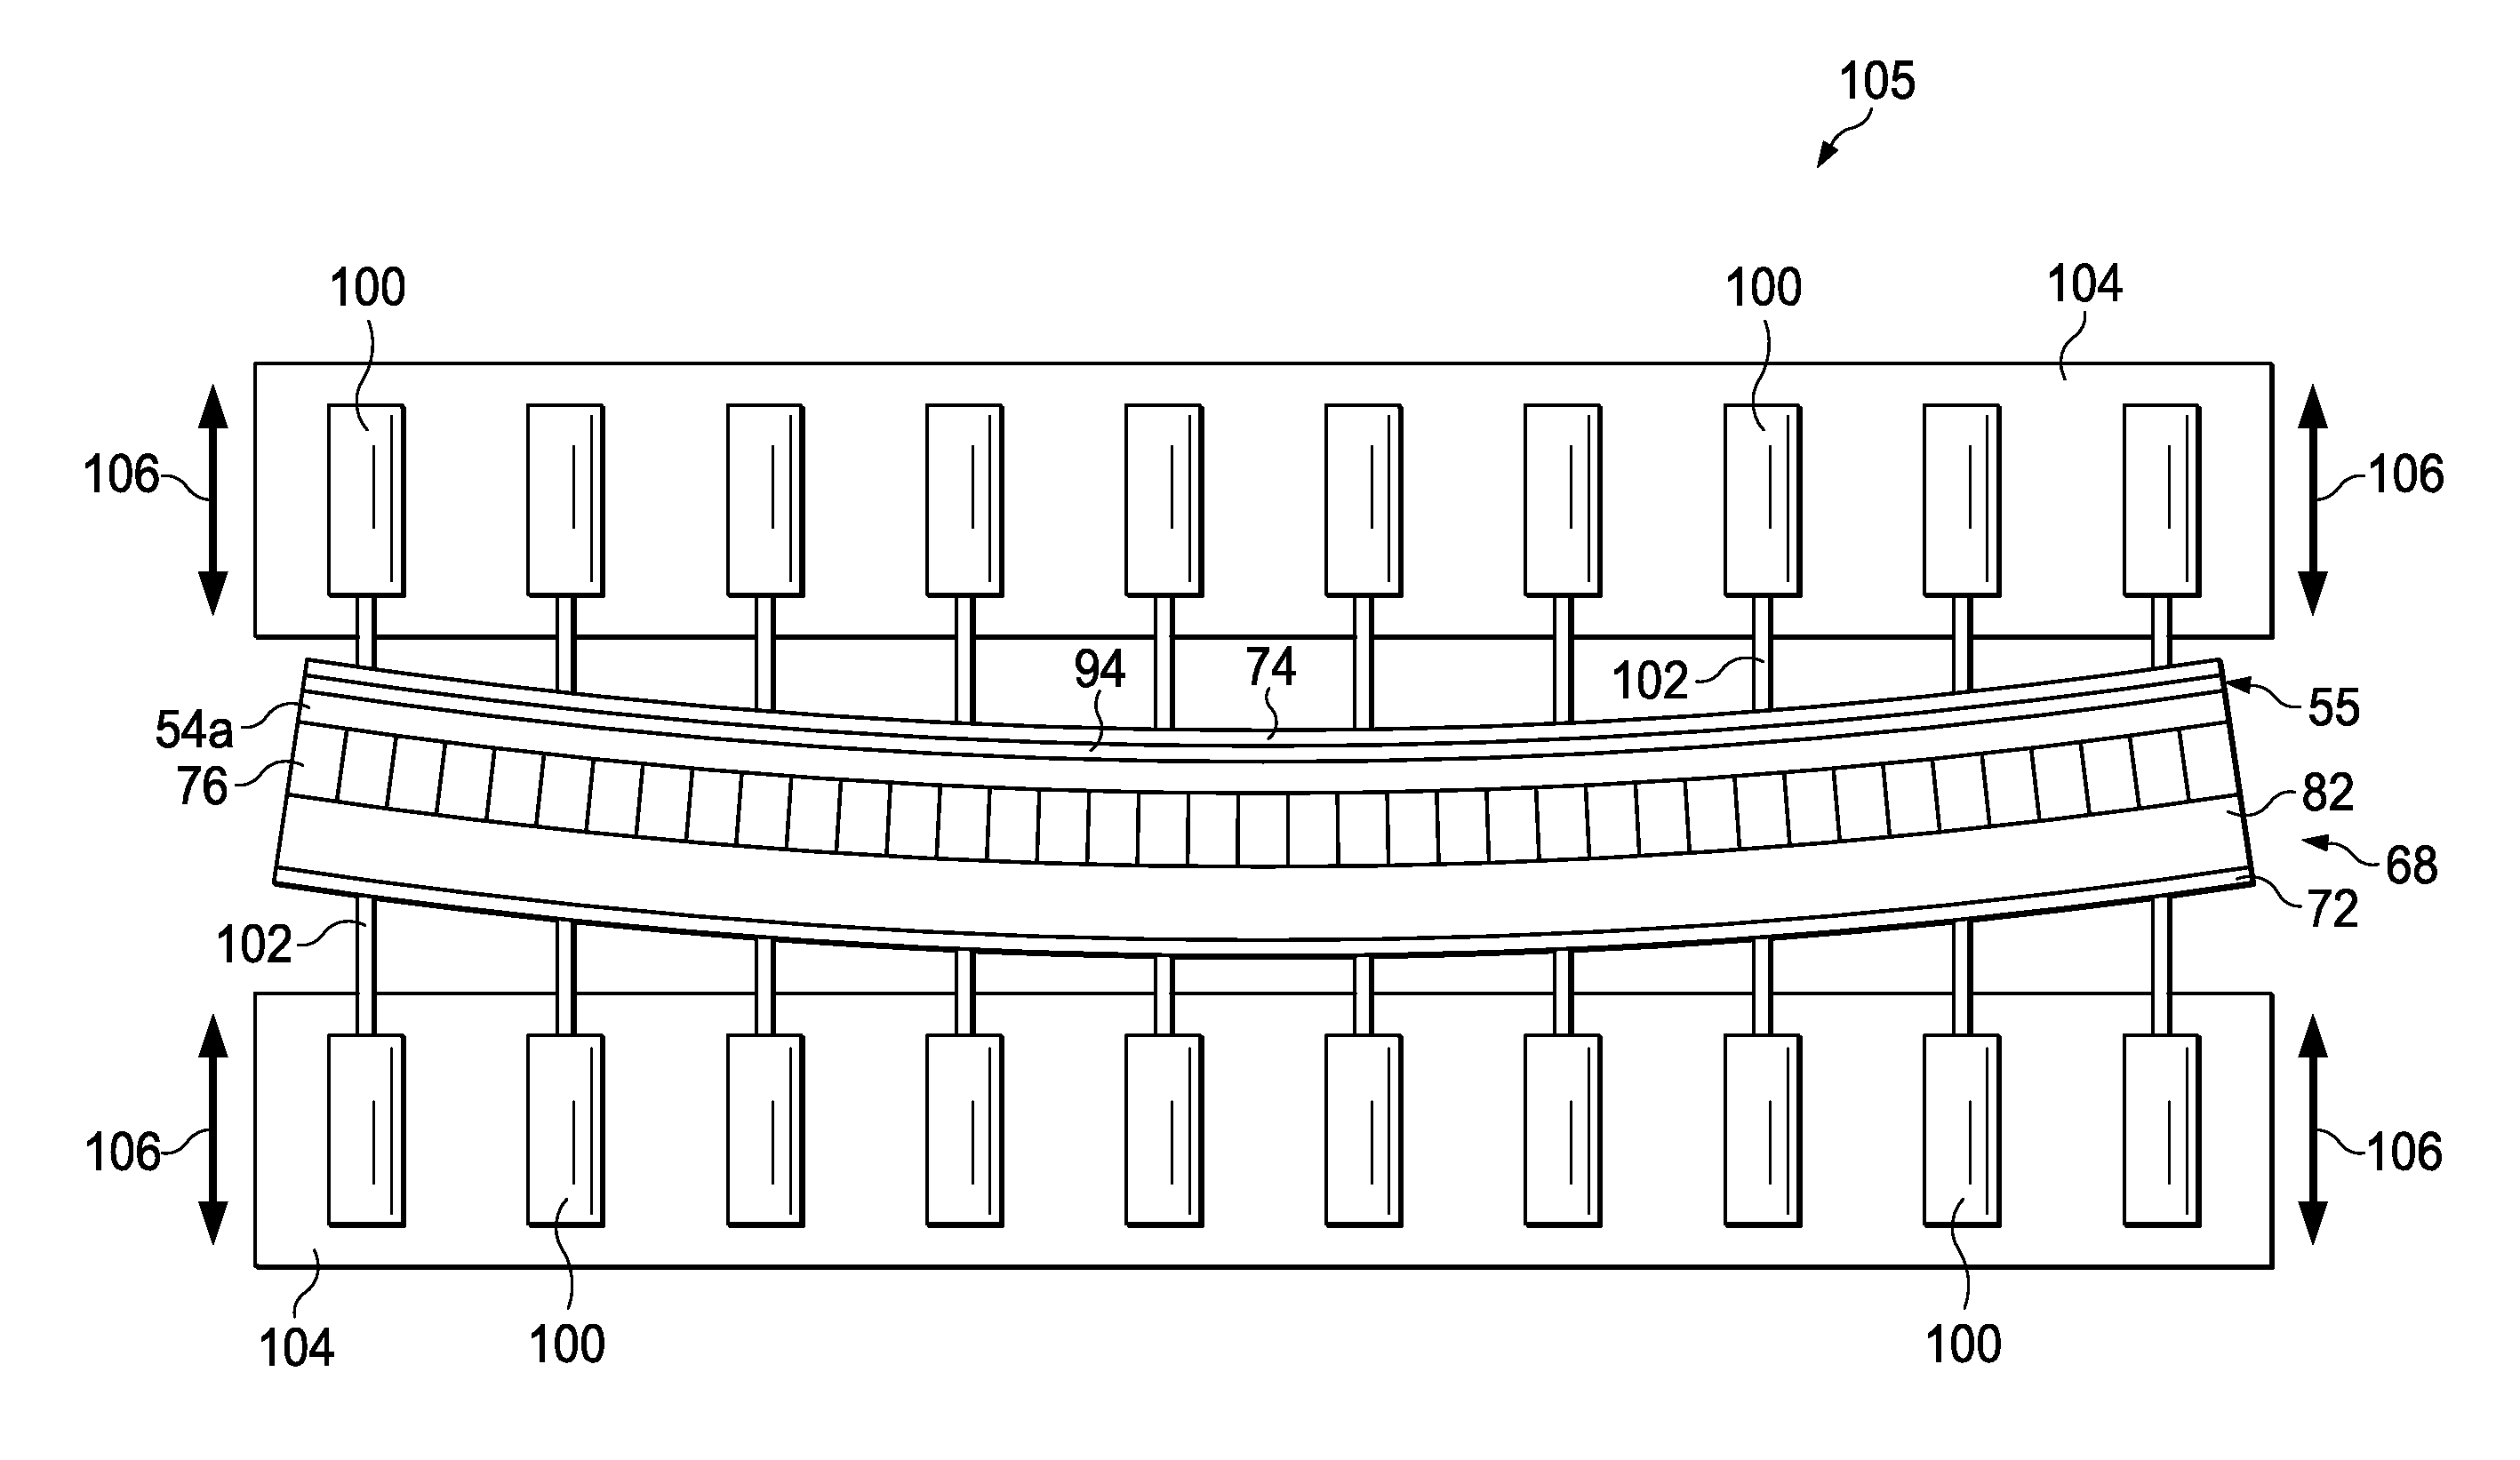 Method and Apparatus for Fabricating Variable Gauge, Contoured Composite Stiffeners